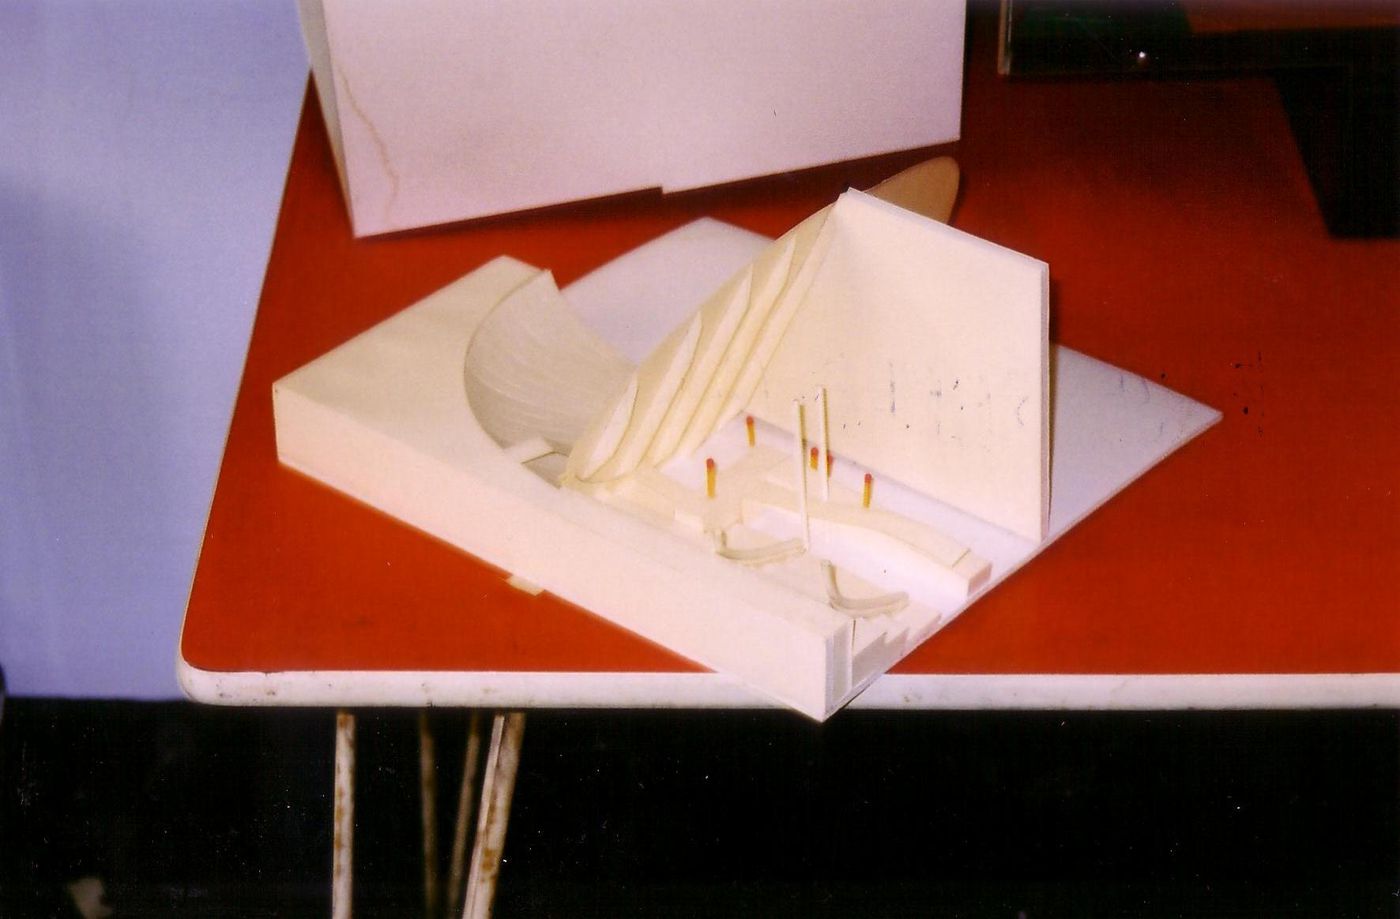 Sectional model of south end showing interior and exterior divided by south wall